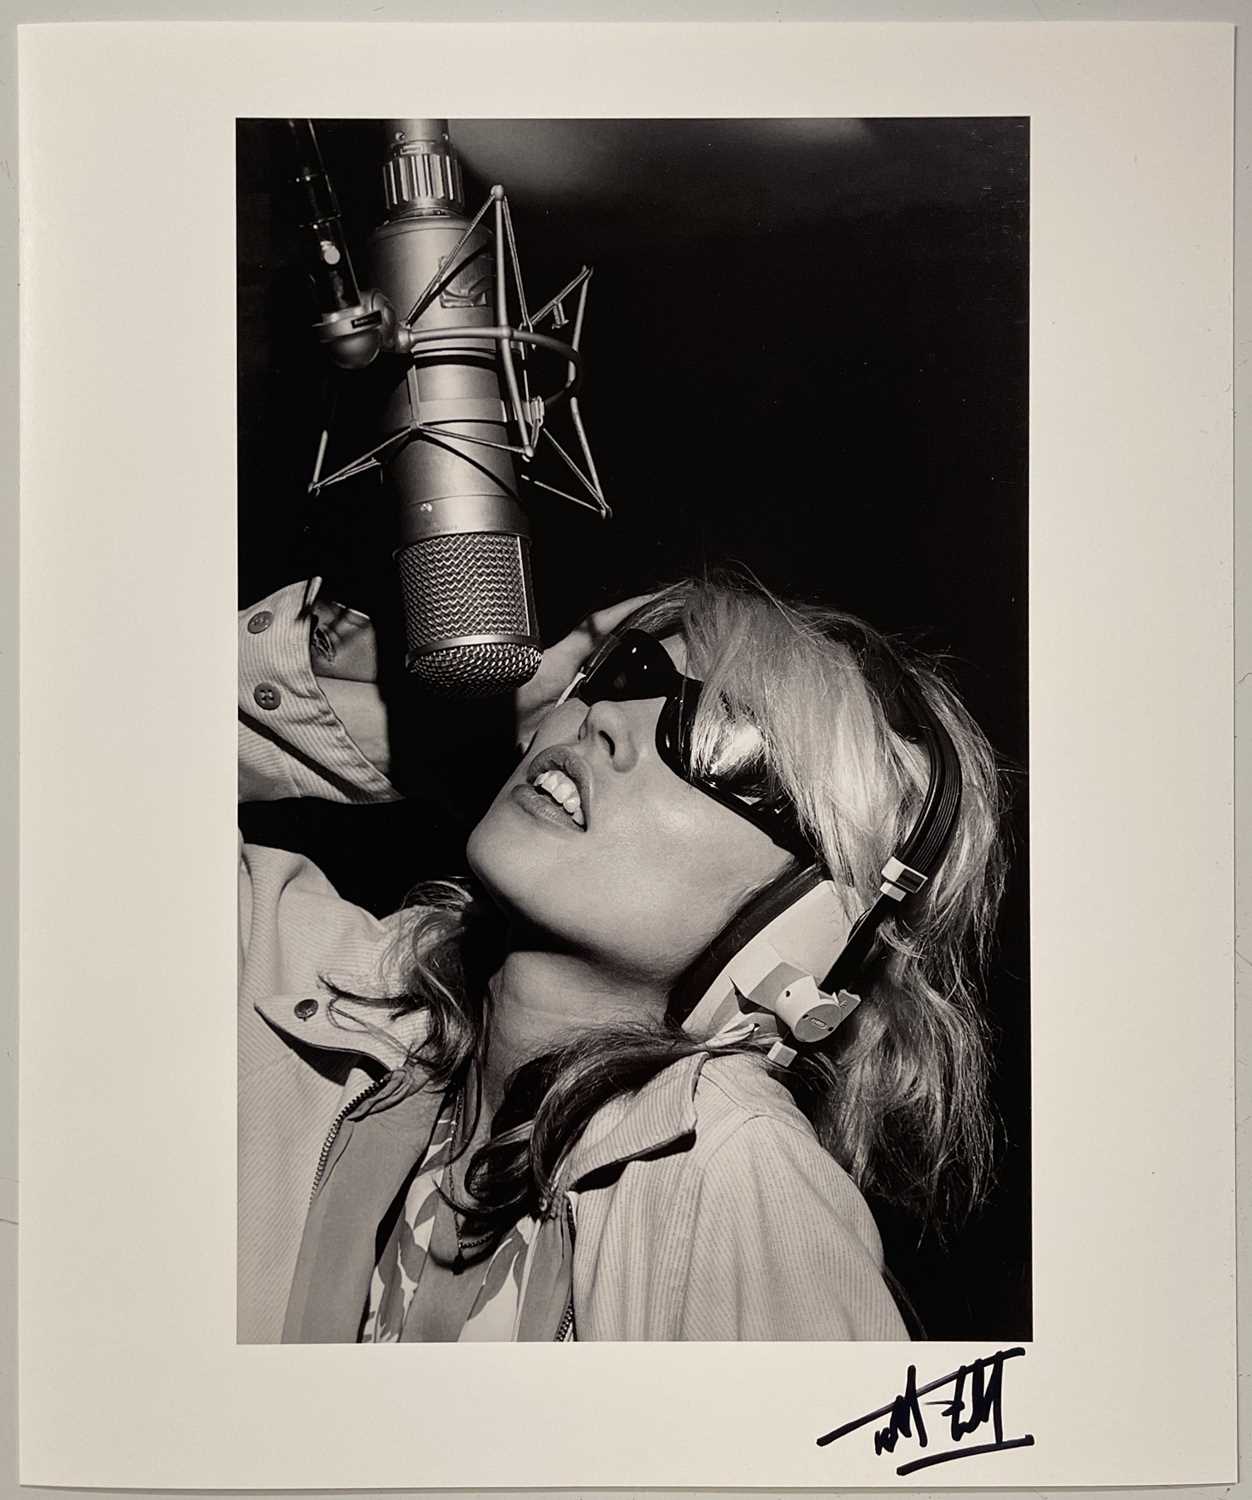 MARTYN GODDARD - DEBBIE HARRY / BLONDIE - LIMITED EDITION CONTACT SHEET PRINT. - Image 3 of 4